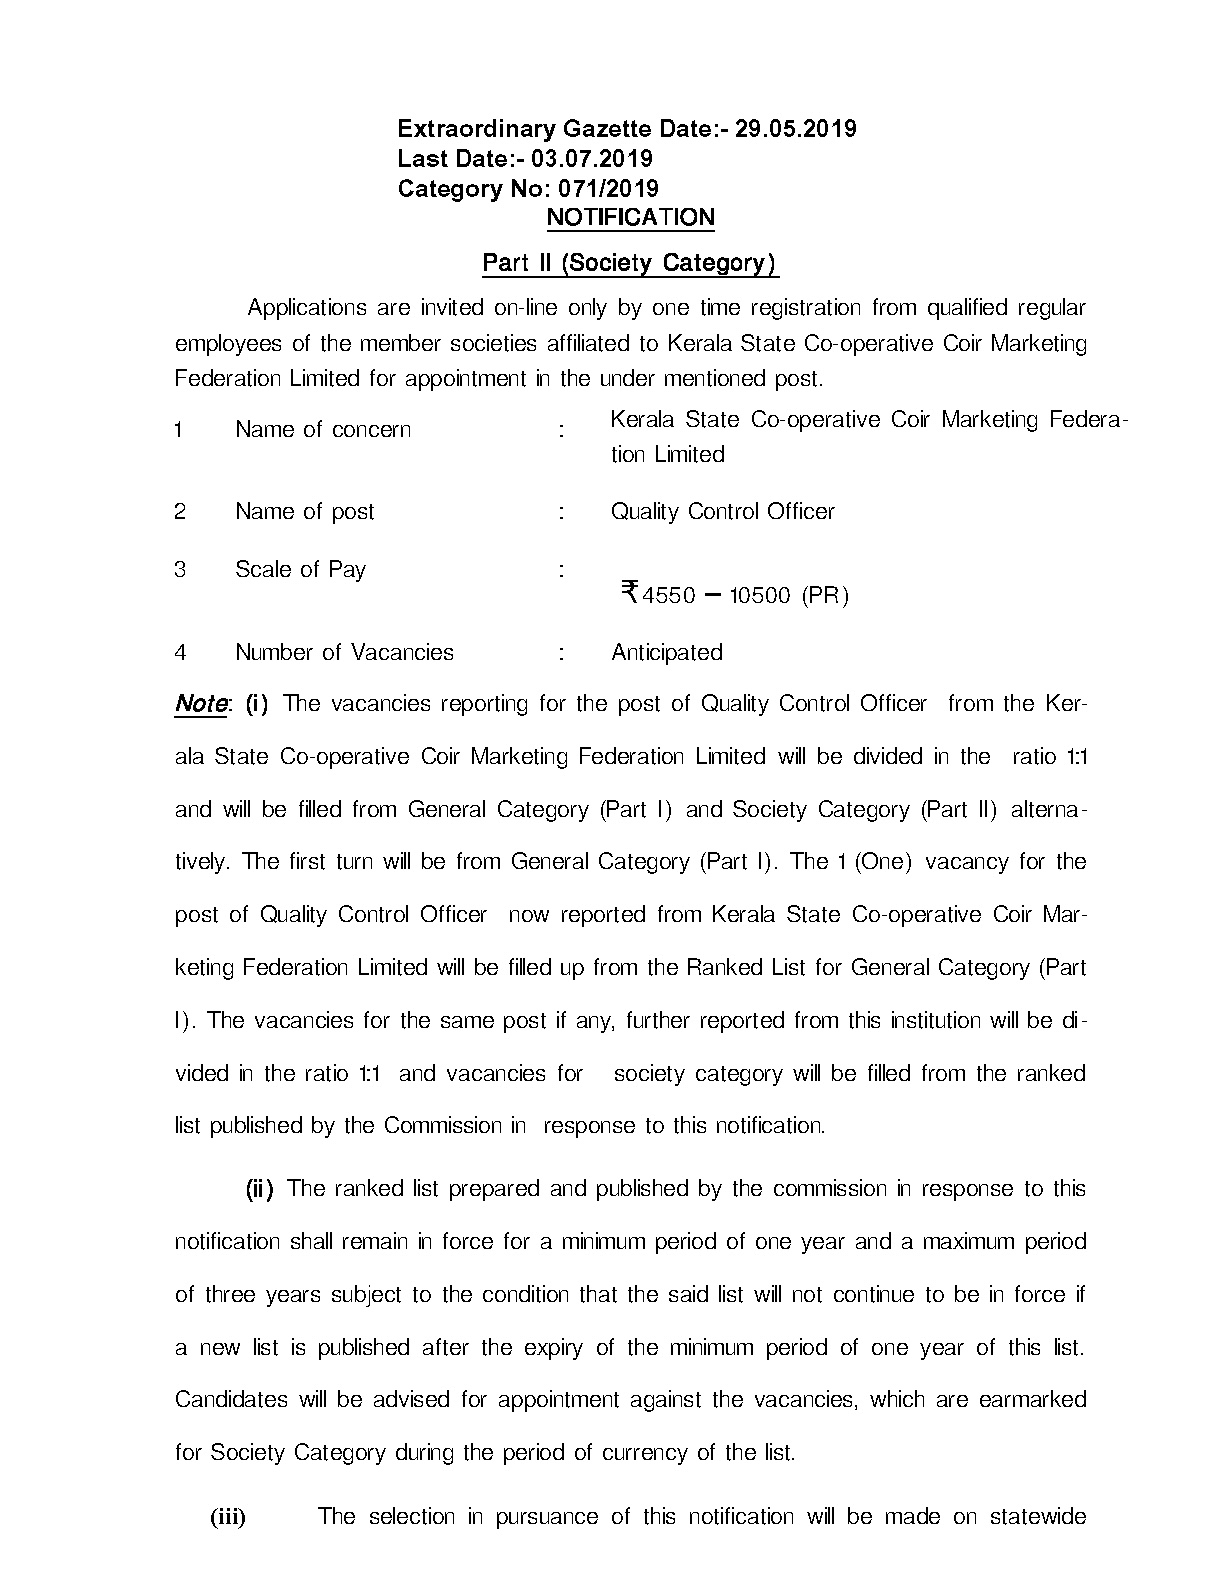 KPSC Quality Control Officer Category 0712019 - Notification Image 1